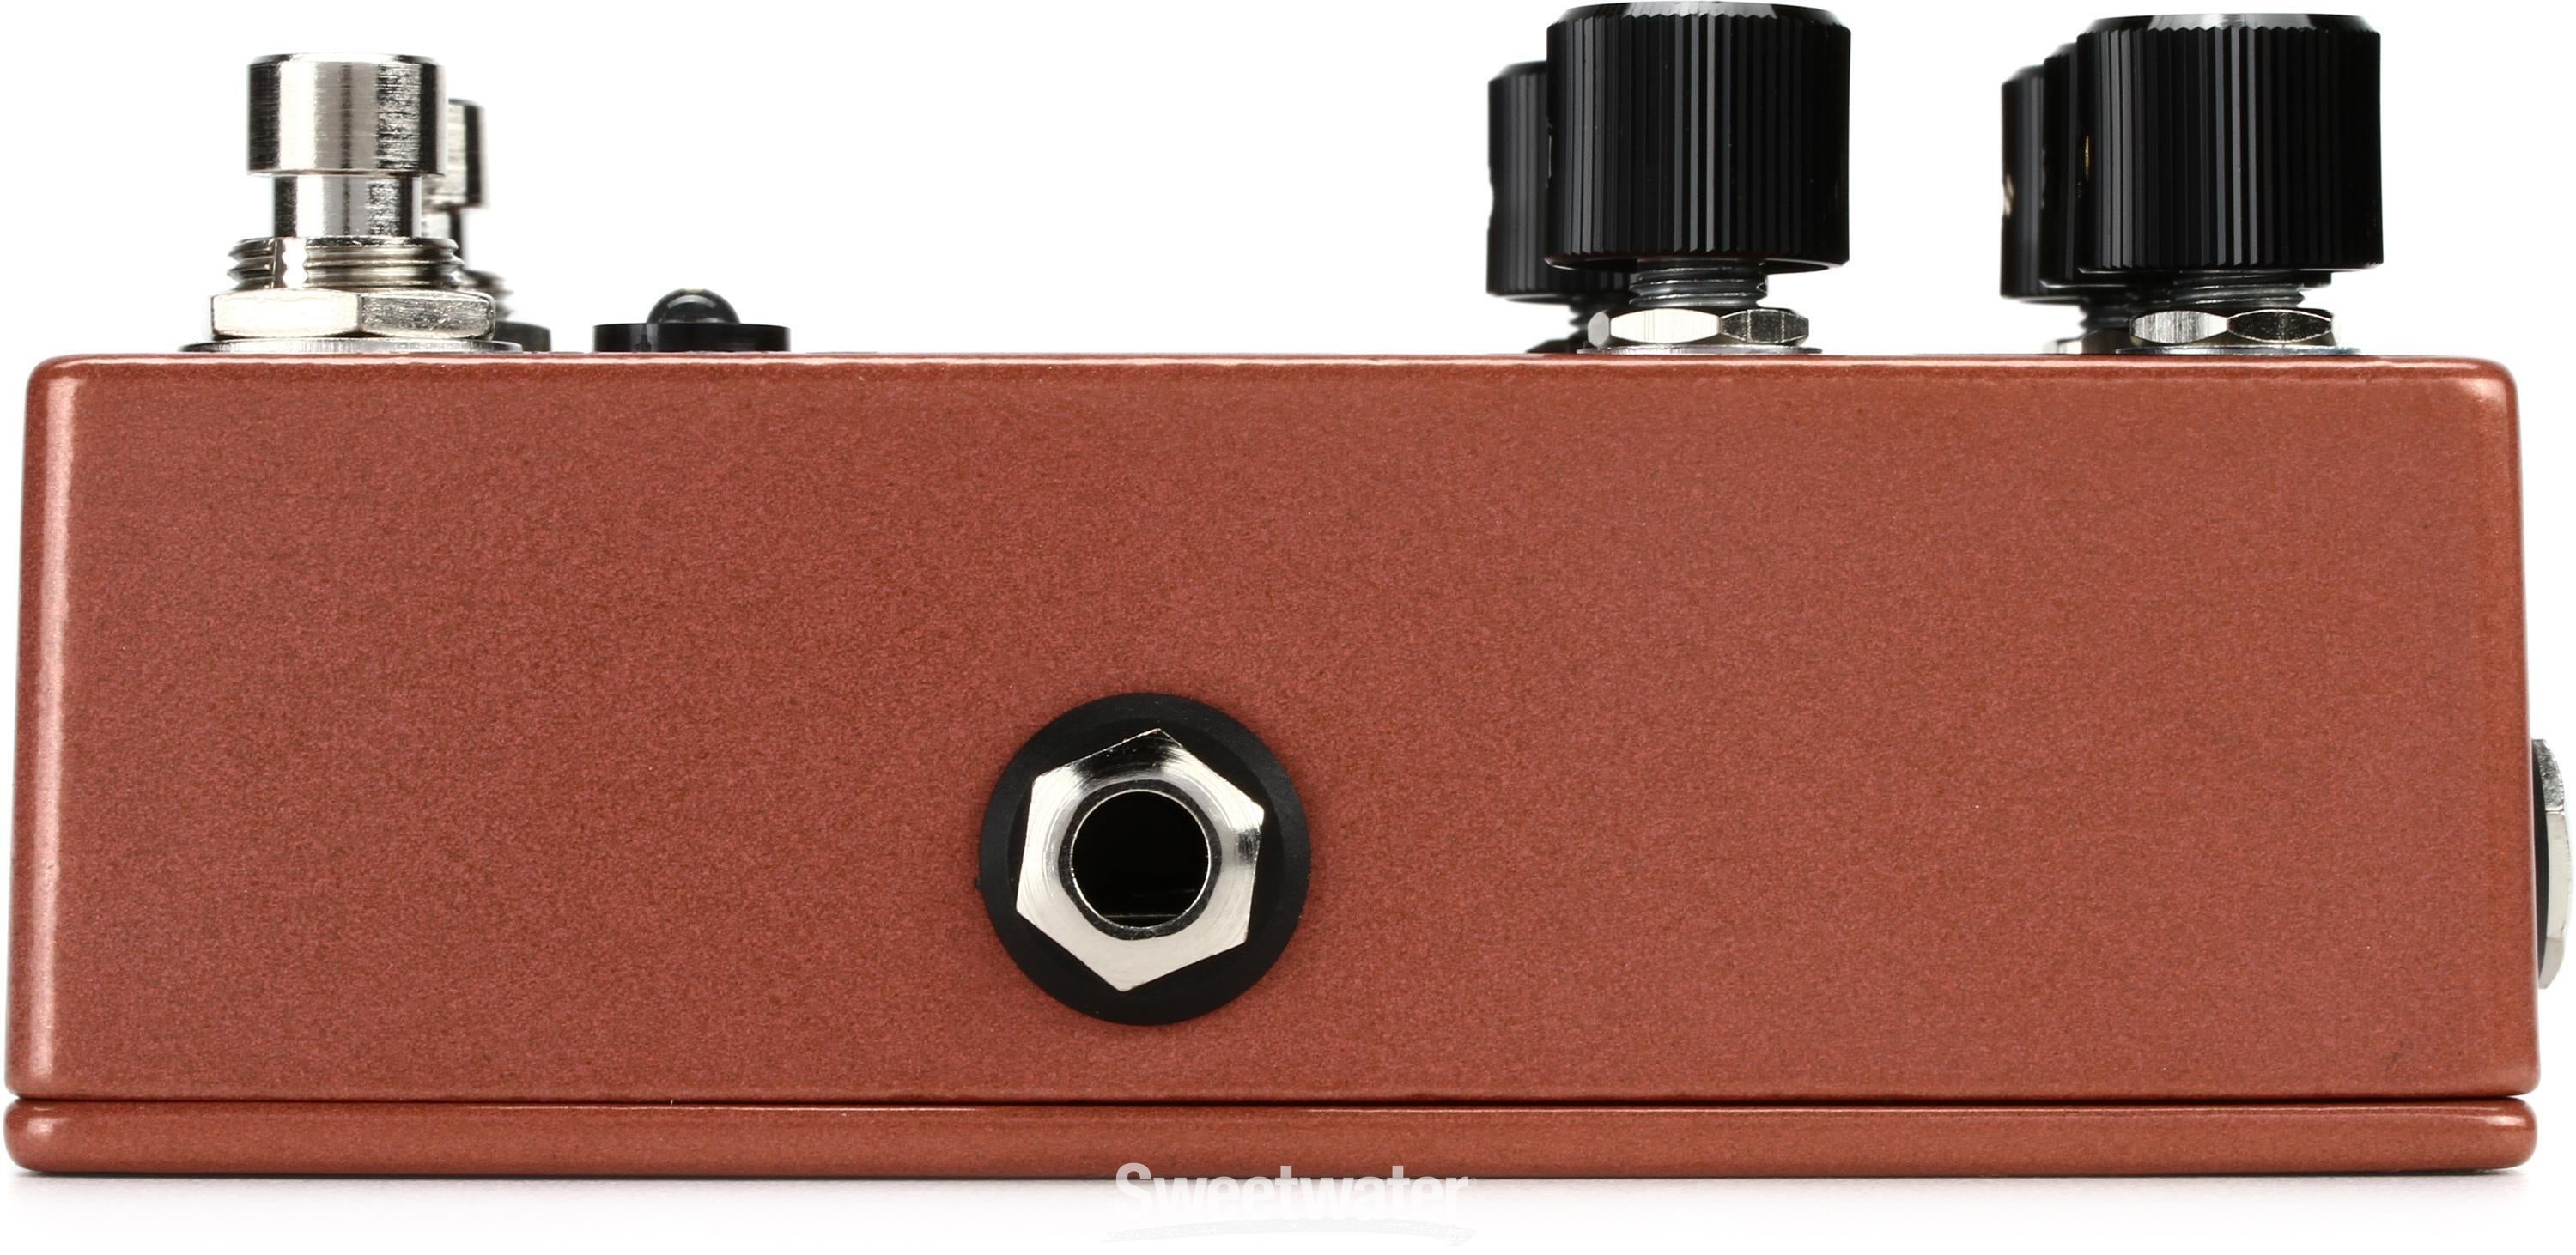 Walrus Audio Monument Harmonic Tap Tremolo Pedal V2 | Sweetwater